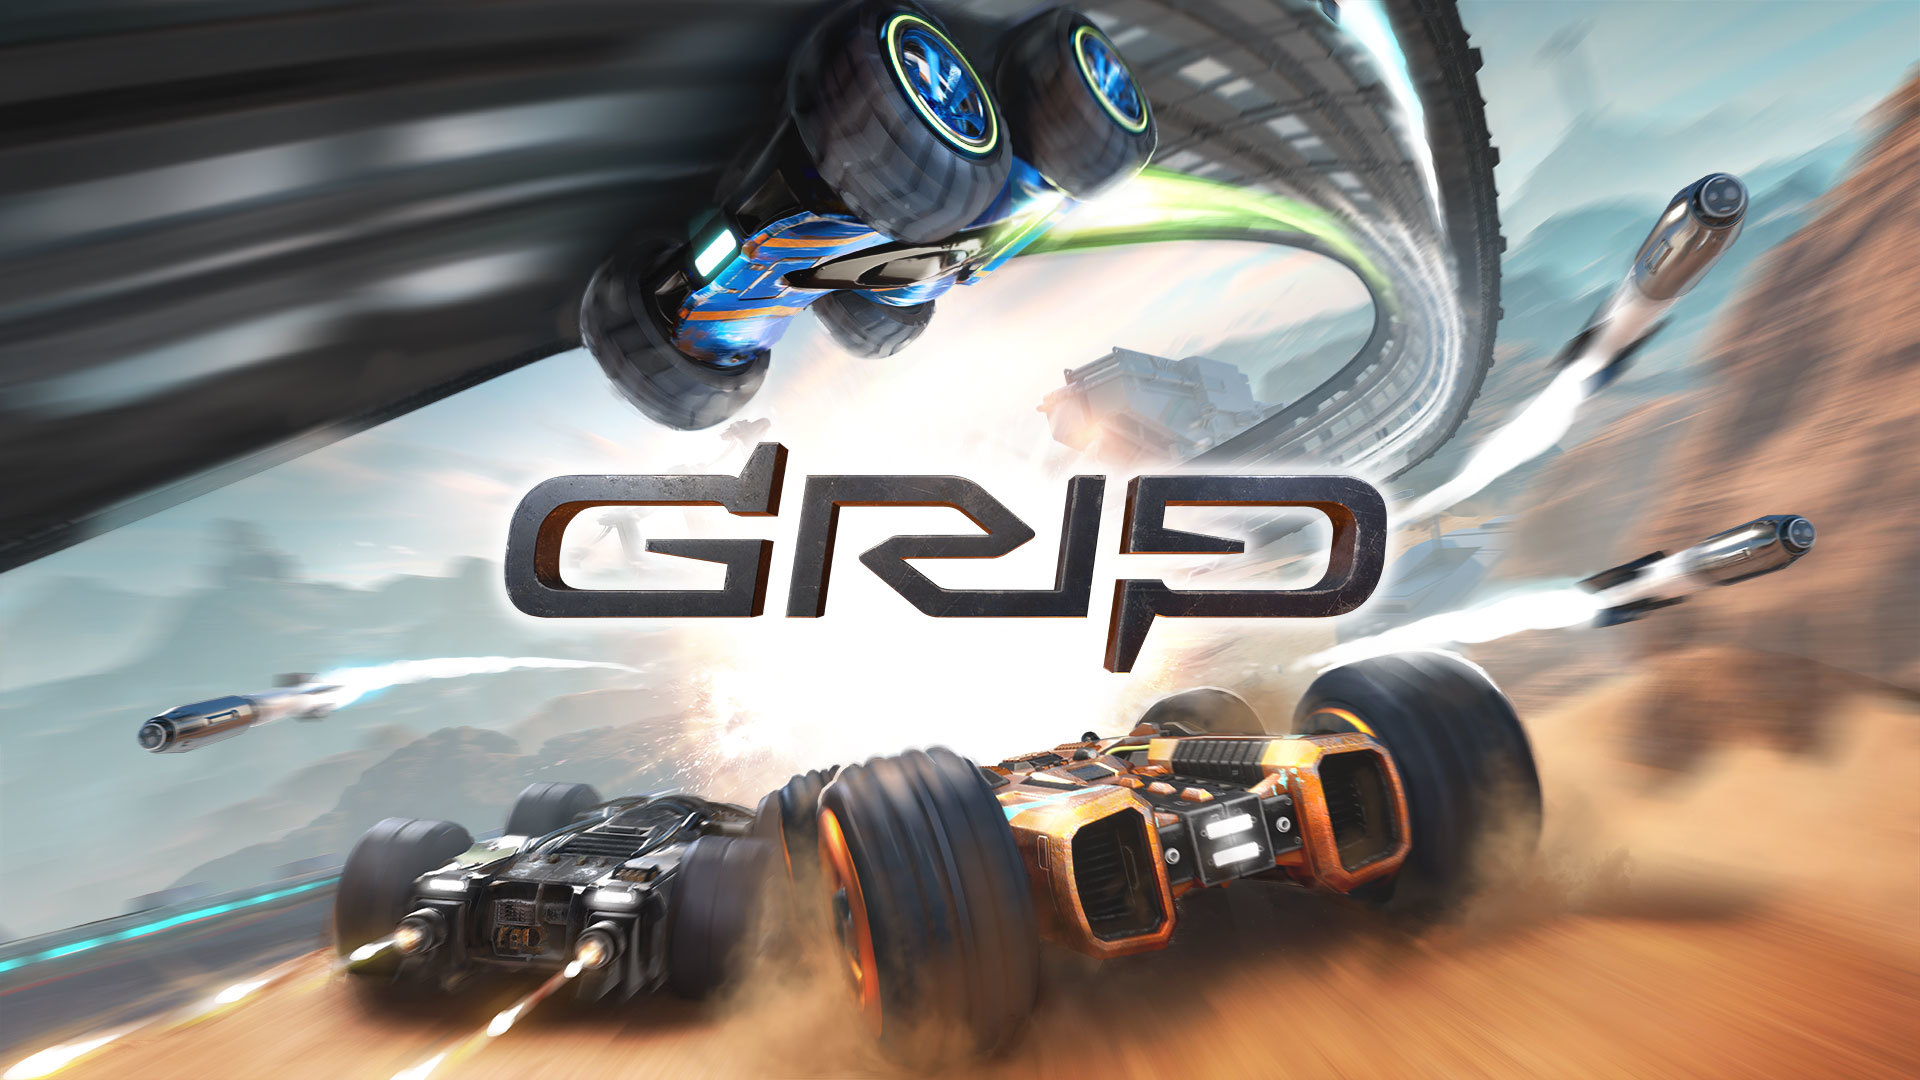 GIRP - Play Online for Free!